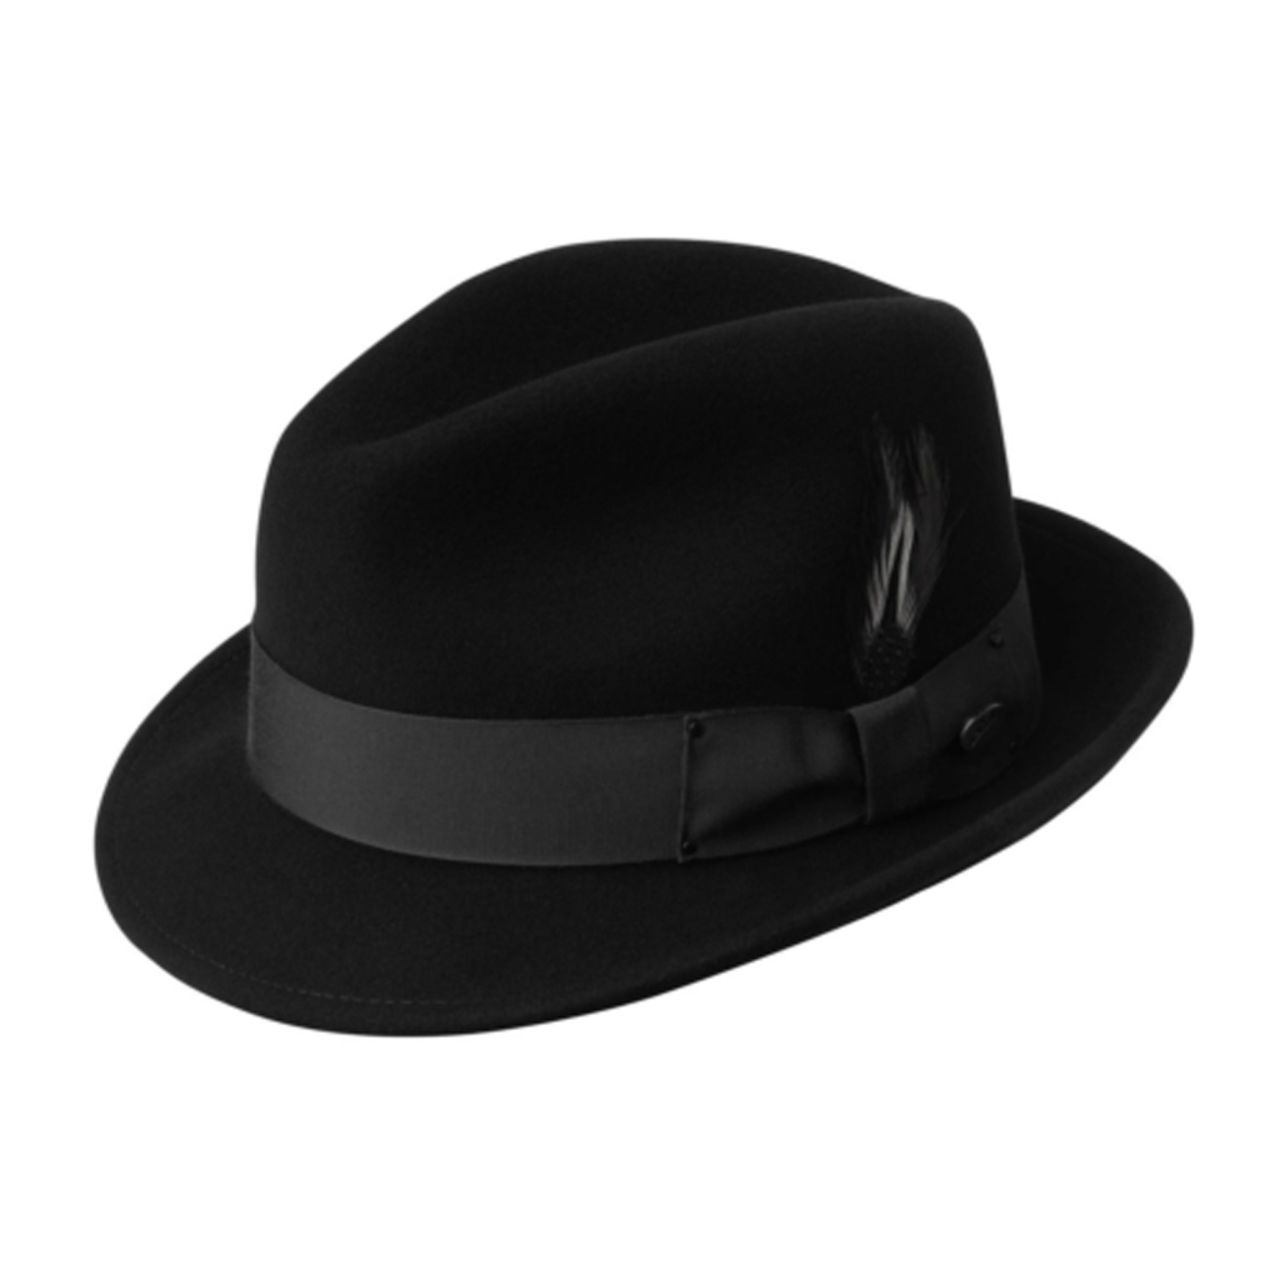 Bollman Hat Company started out in 1868 as a manufacturer of black felt hats in Adamstown, Pennsylvania. It continues to make wool felt, fur felt, and straw hats and caps from its employee-owned factory in the same town.  